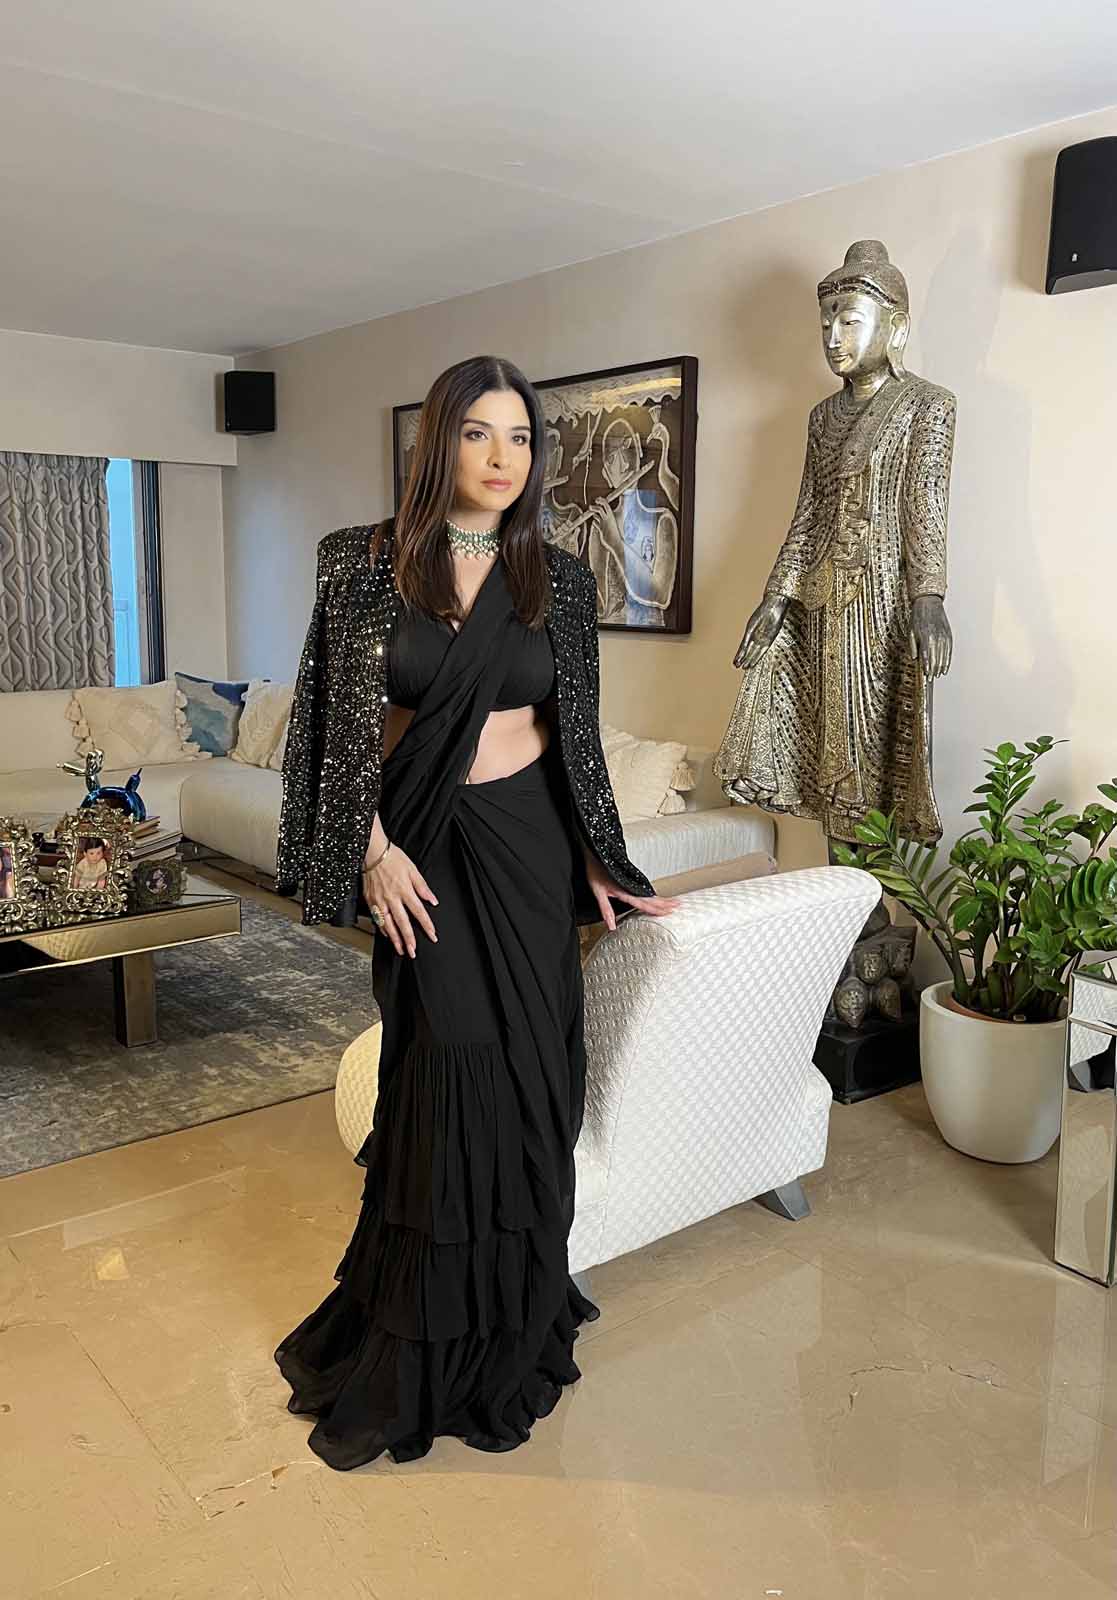 Premium Photo | Professional 40s woman in saree and blazer blending  elegance and modernity